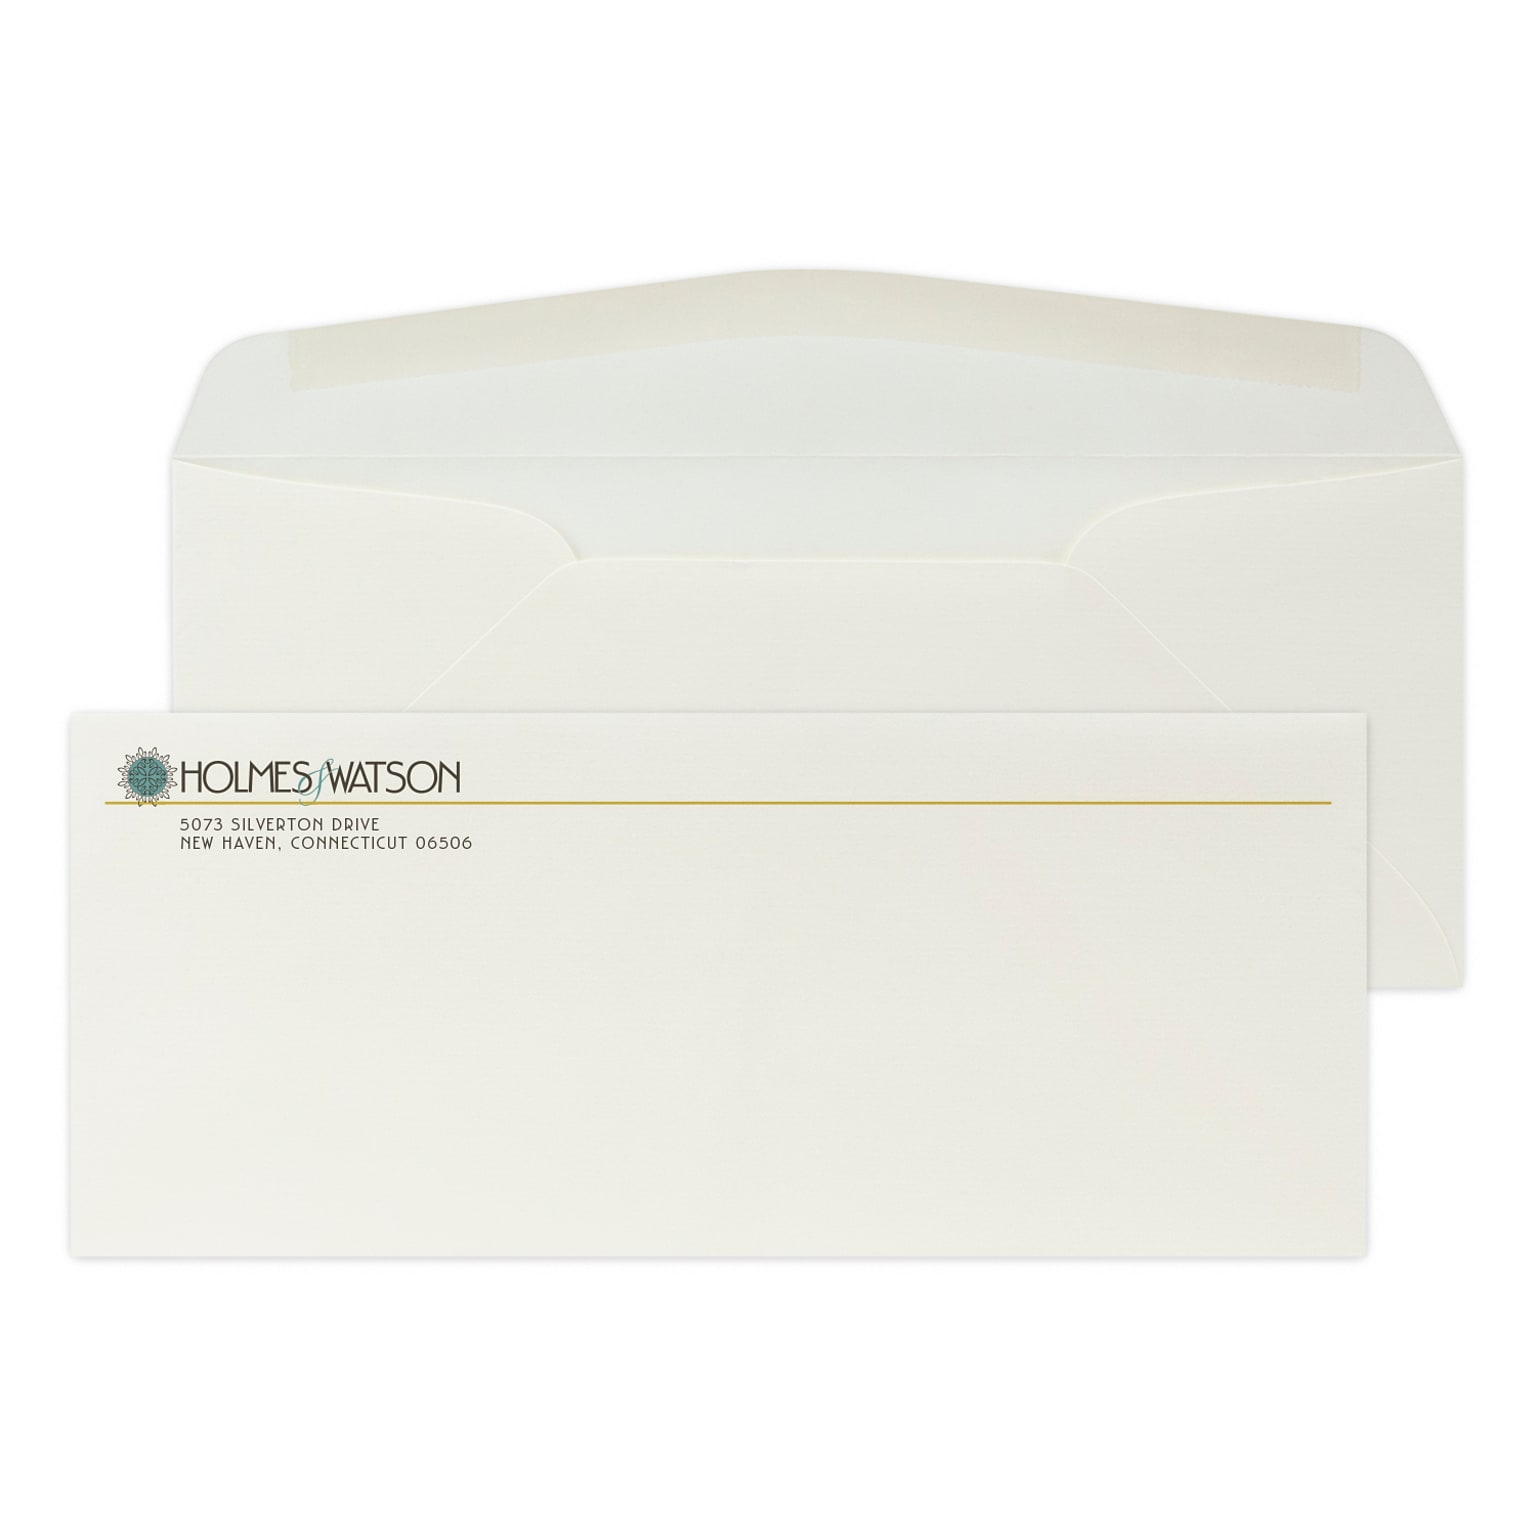 Custom Full Color #10 Stationery Envelopes, 4 1/4 x 9 1/2, 24# CLASSIC® LAID Natural White, Flat Ink, 250 / Pack